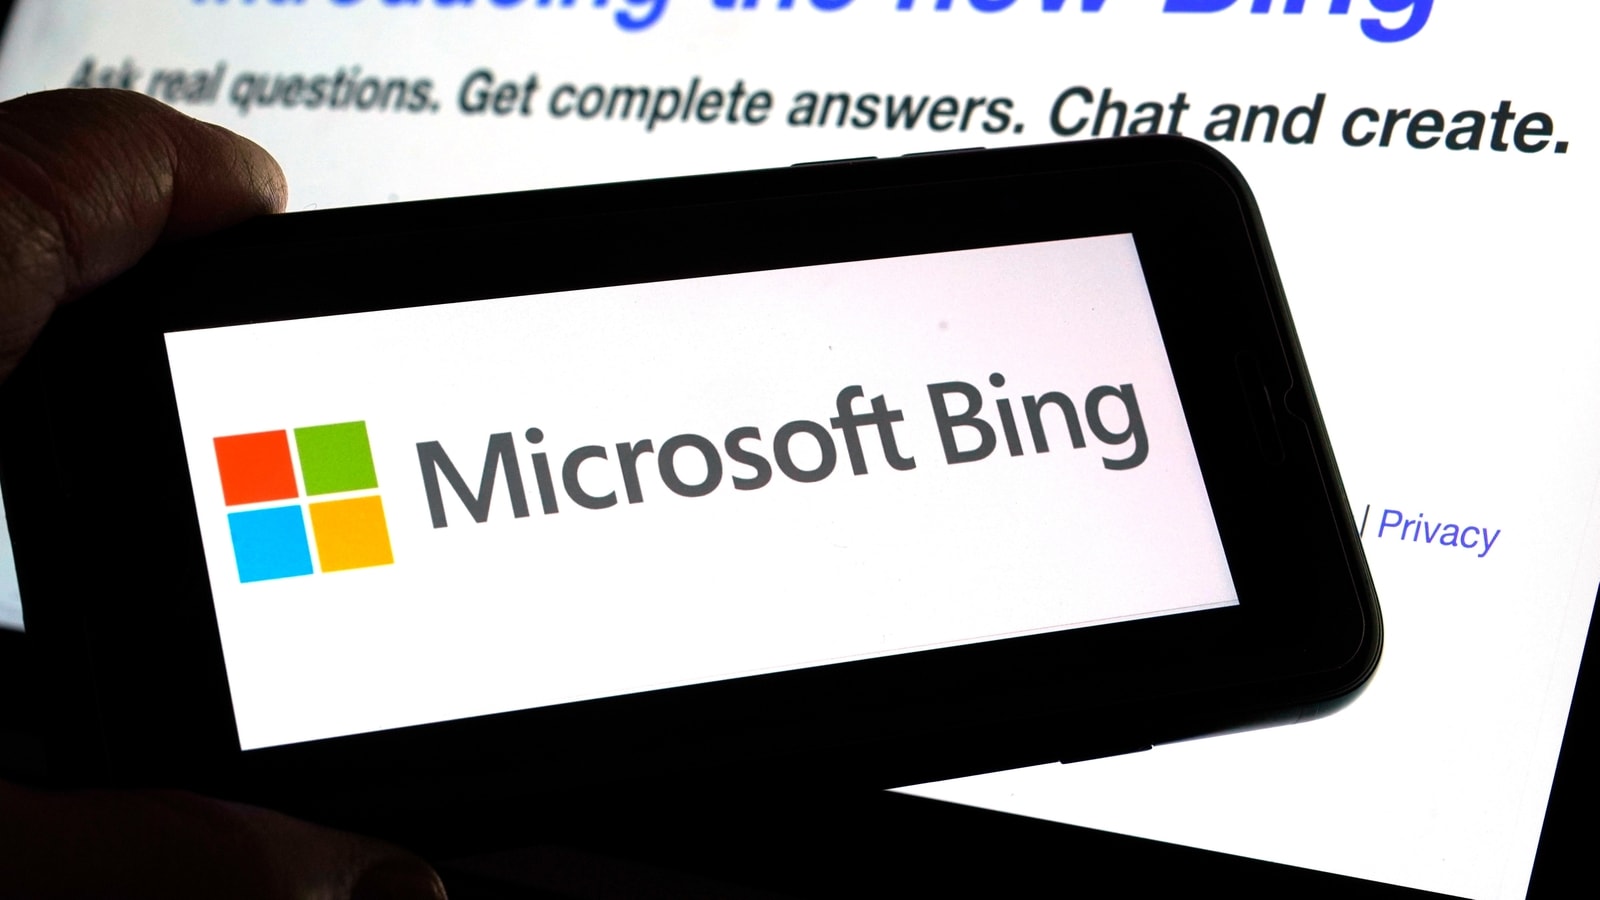 Microsoft Bing, LinkedIn vow more ads transparency